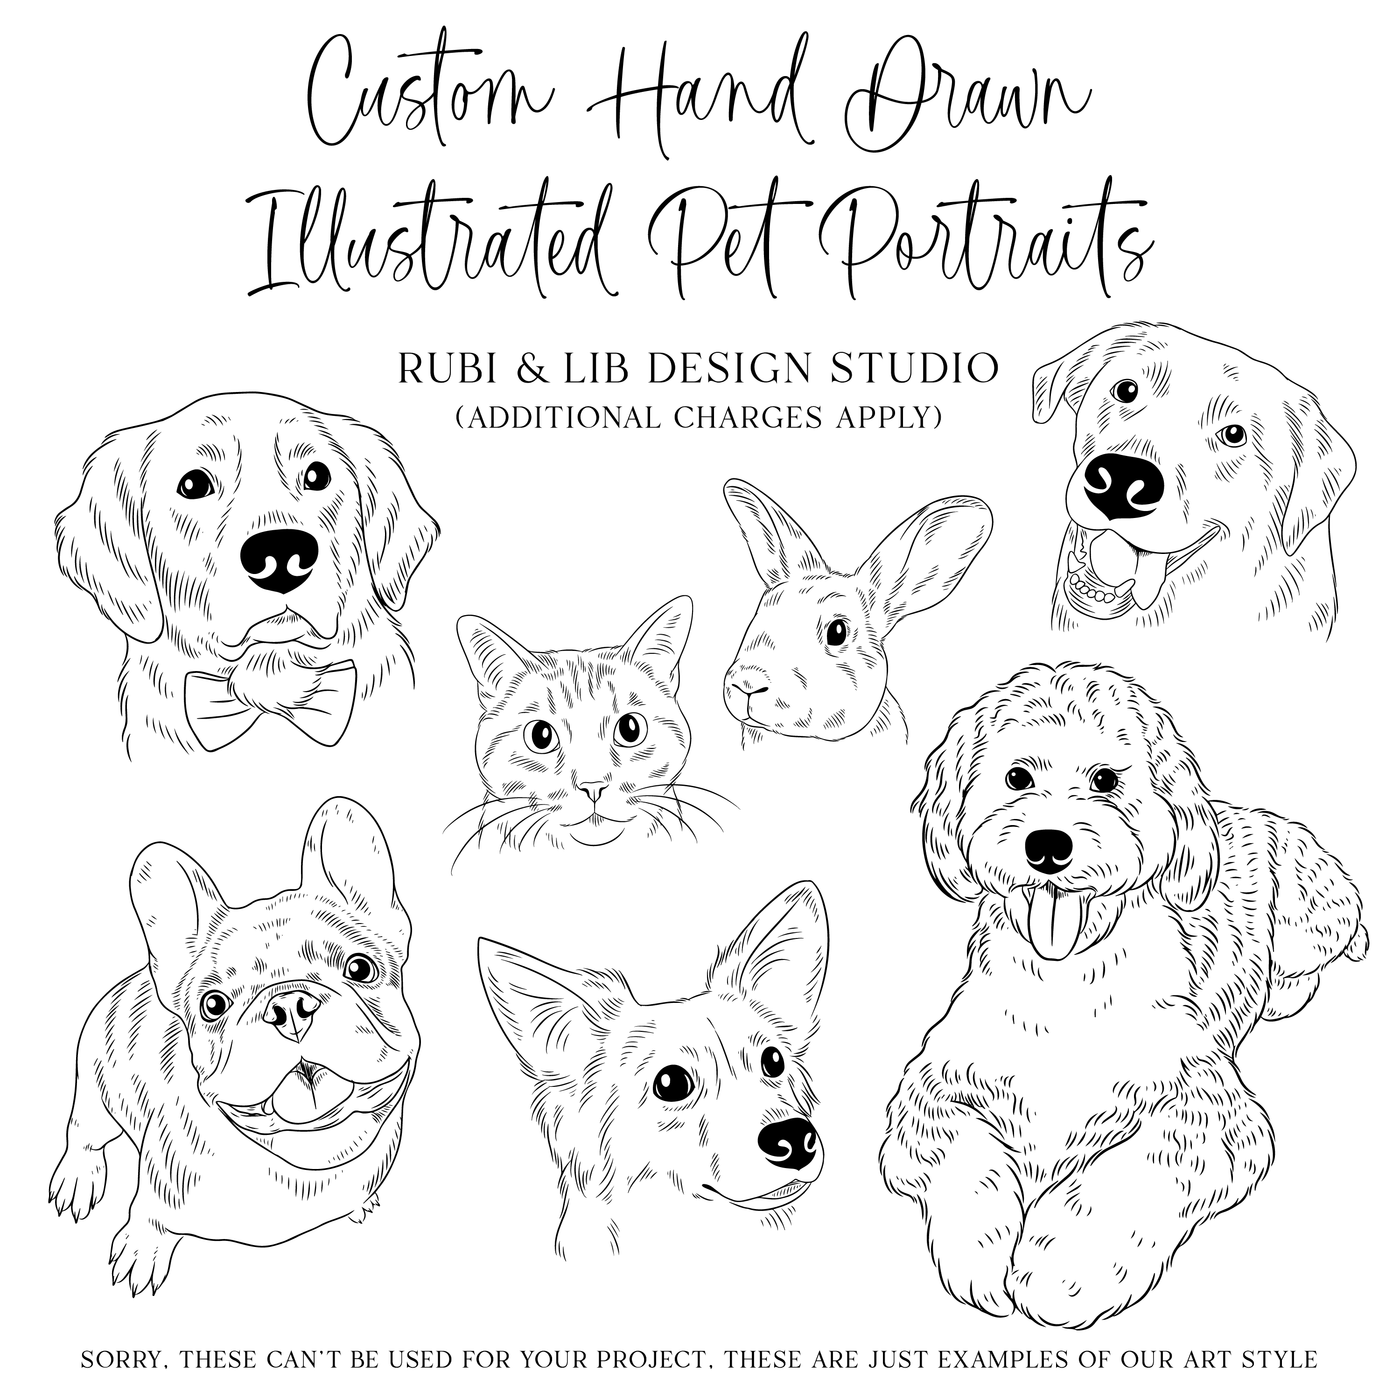 Illustrated Pet Wedding Welcome Sign